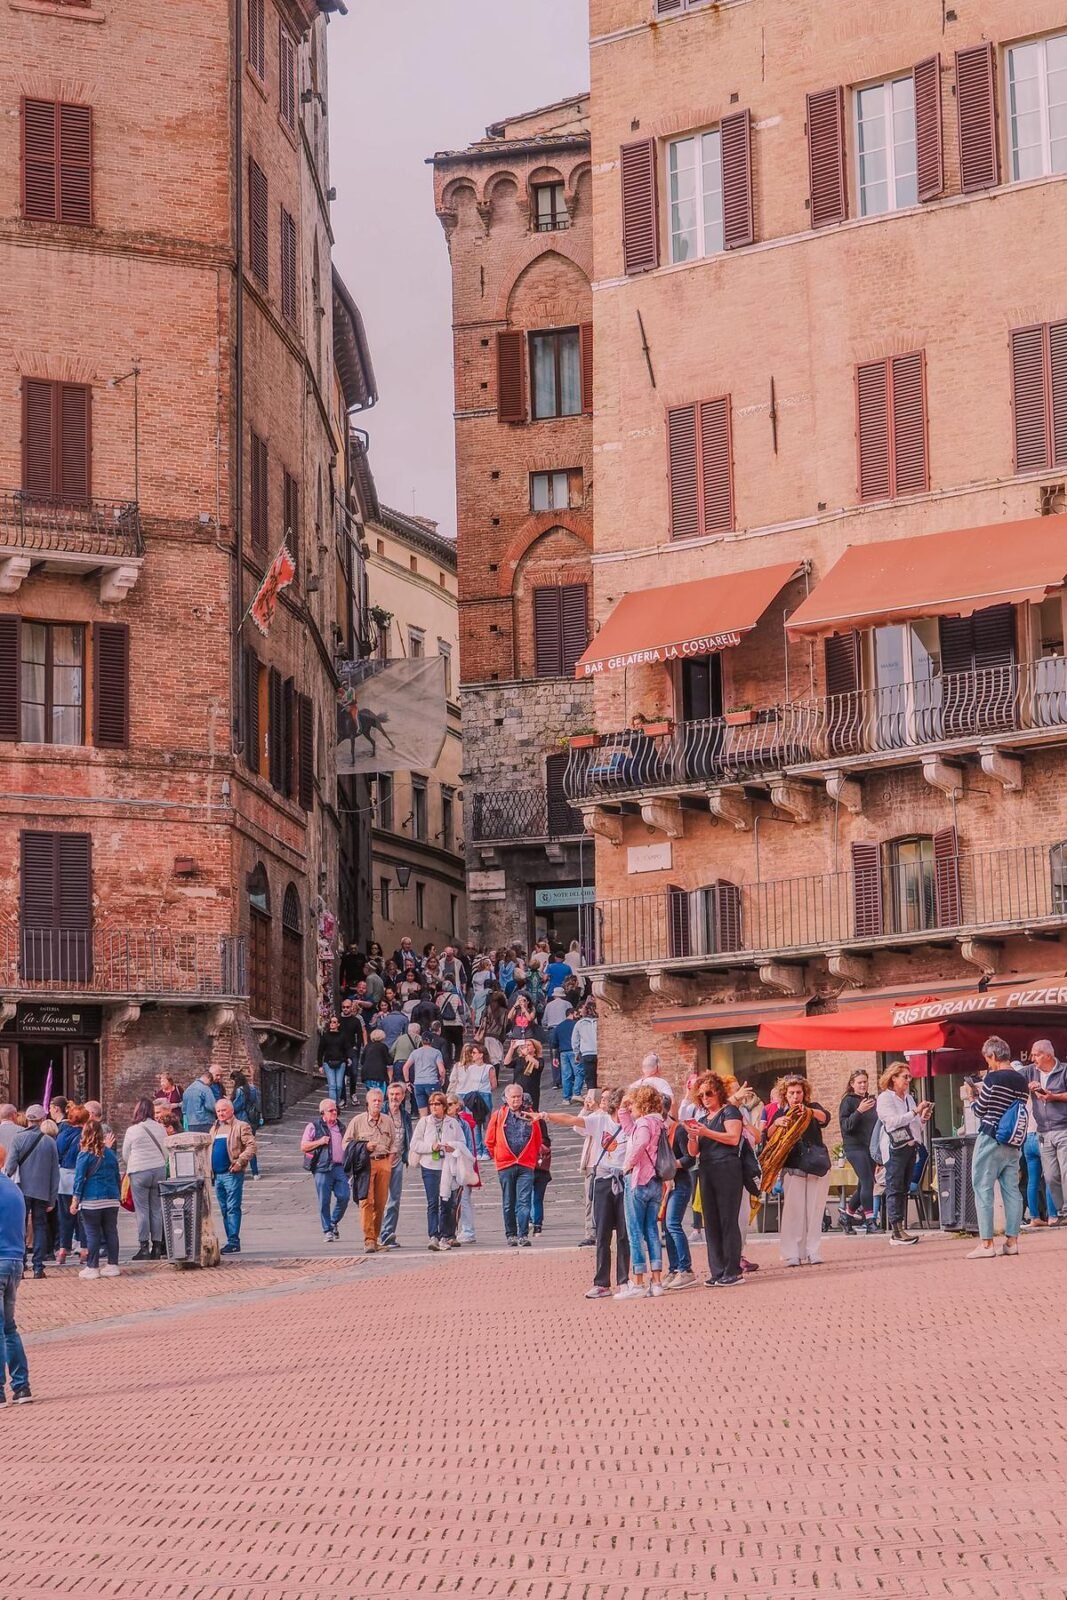 Bustling street scene in Siena, Italy with locals and tourists